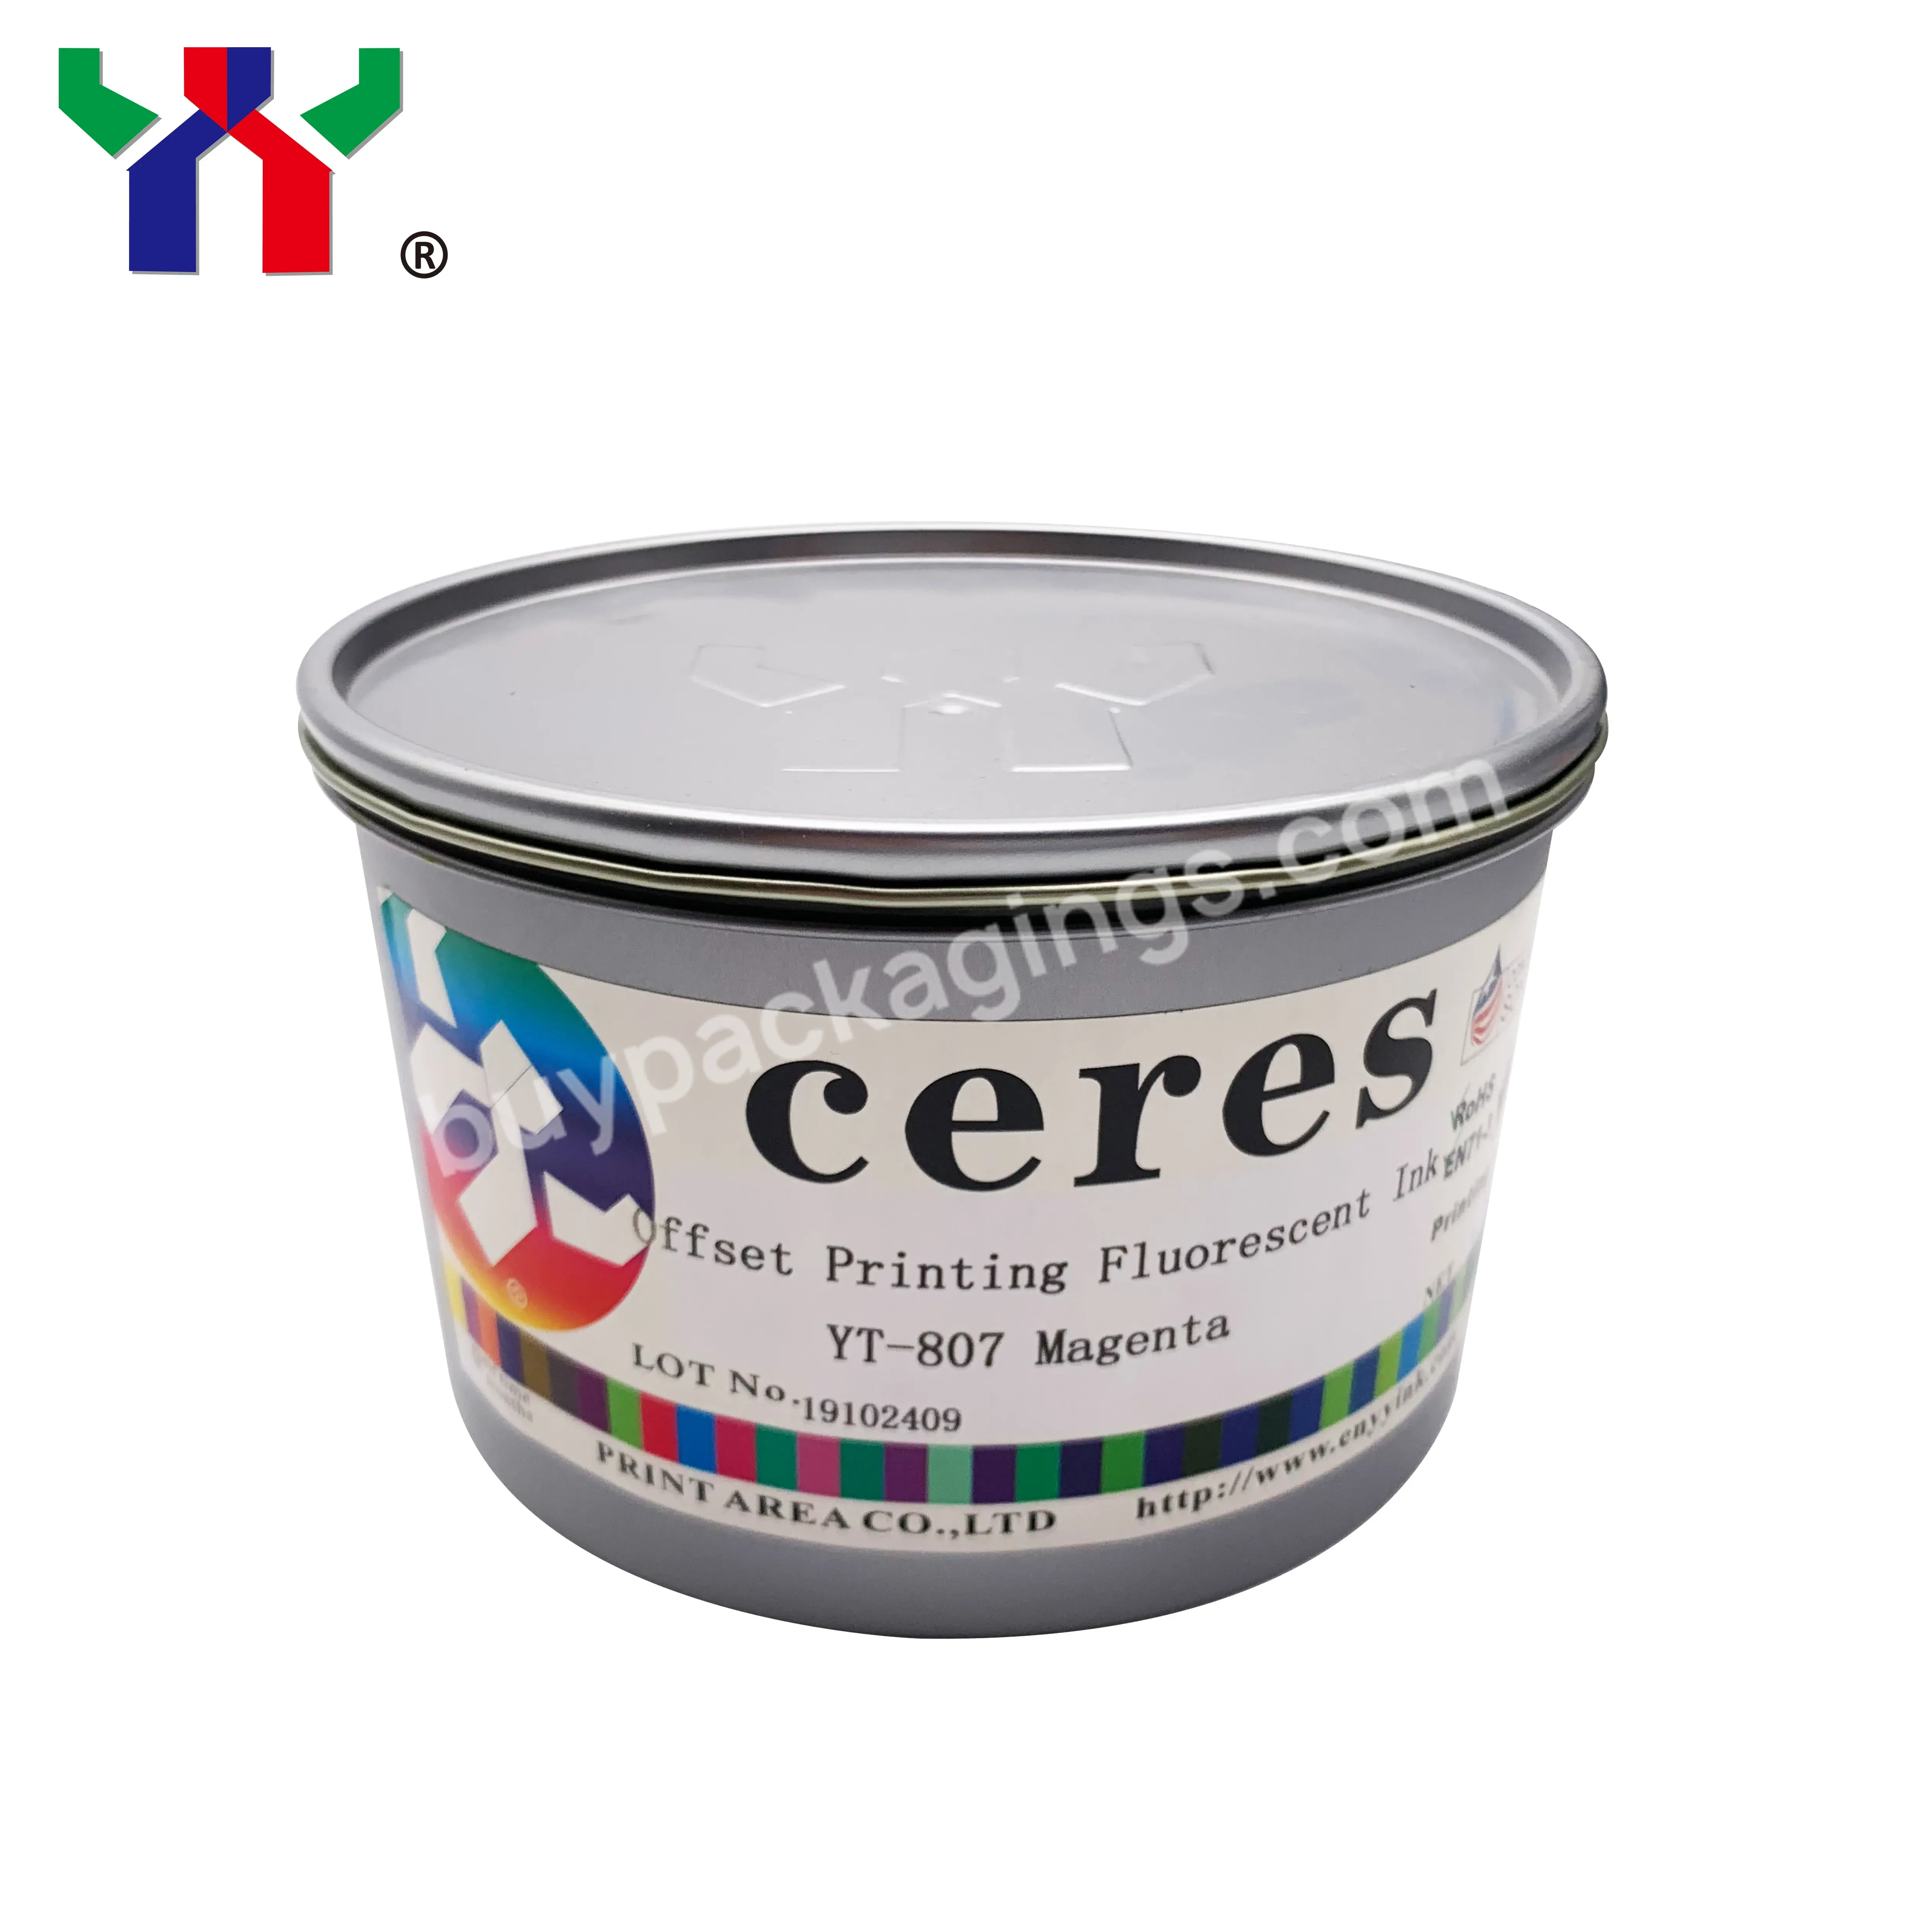 High Quality Ceres Uv Offset Printing Fluorescent Ink,Uv Dry - Yt-807 Magenta,1 Kg/can - Buy Fluorescent Ink,Pantone Ink,Uv Offset Printing Ink.